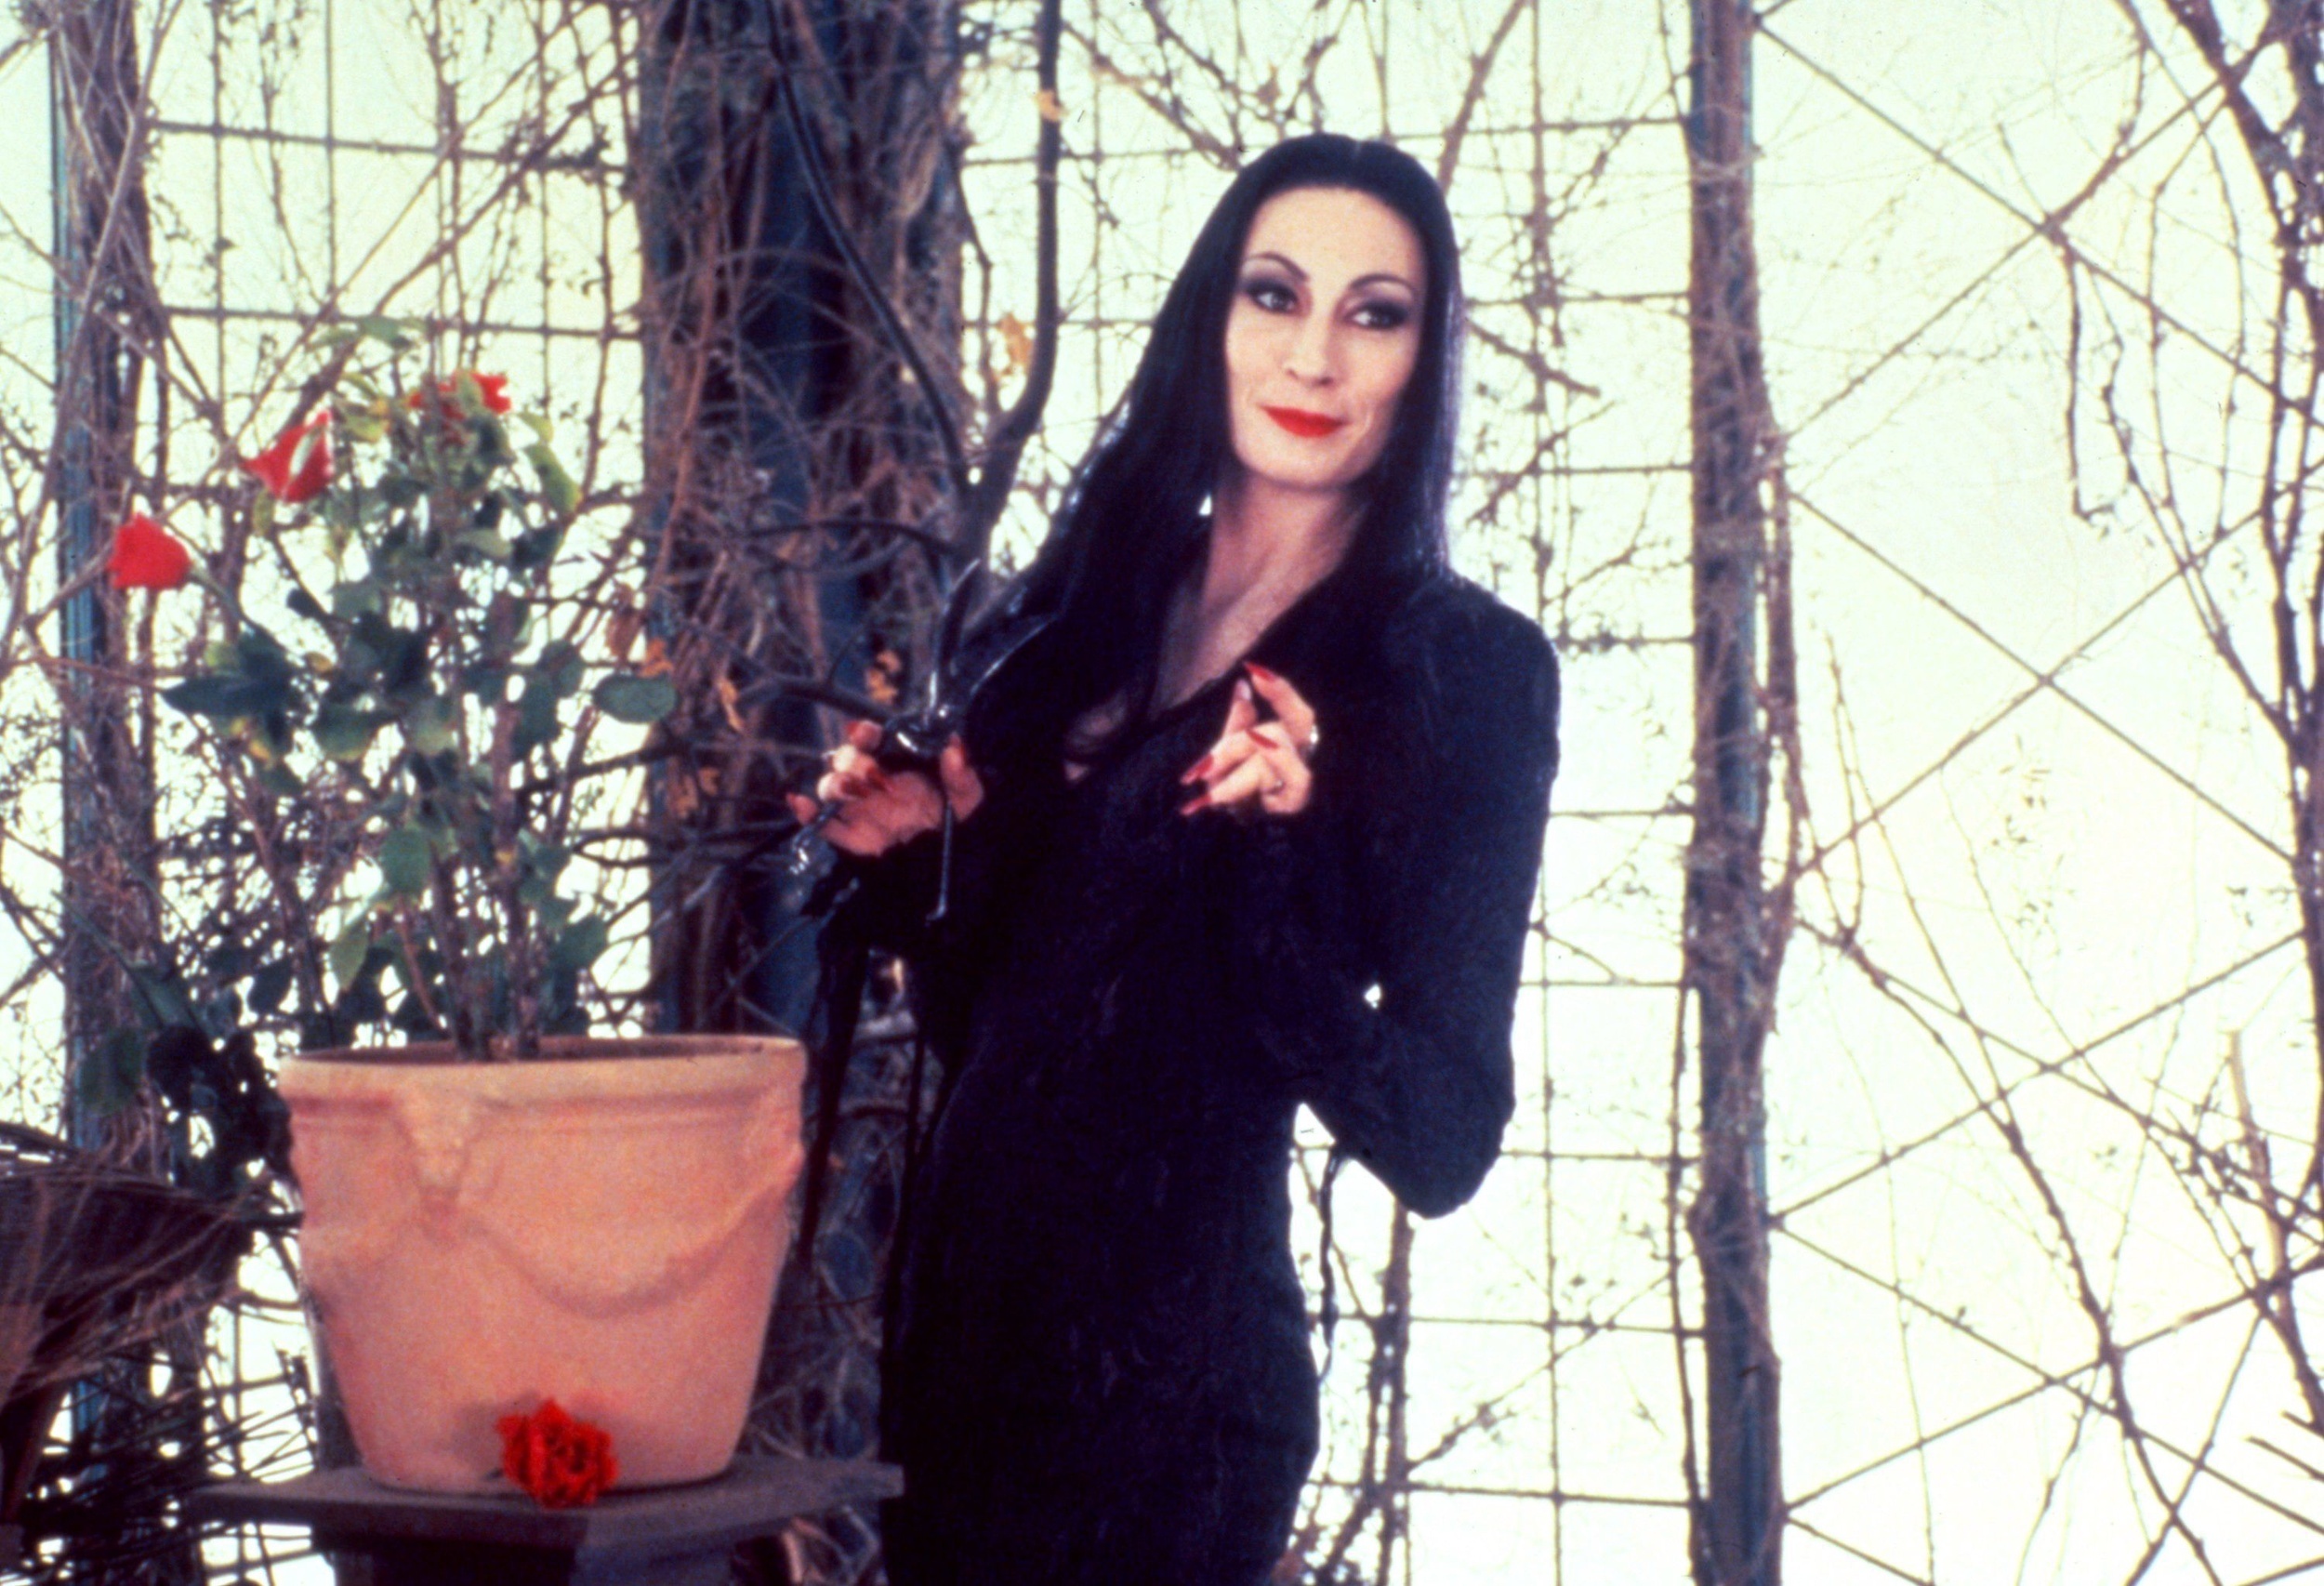 <p>Maybe this was a case of be careful what you wish for. In her autobiography, Huston said shooting the movie was “long and arduous.” For some reason, it was decided that Morticia’s eyes would slant upwards. To make this happen, an elastic strap was attached to the back of her head and glued to her temples. It was incredibly uncomfortable for her, and she had to take them off at lunch to avoid a rash and a headache. This led to hours in the makeup chair to fix everything, making it quite the vicious cycle for Huston.</p><p><a href='https://www.msn.com/en-us/community/channel/vid-cj9pqbr0vn9in2b6ddcd8sfgpfq6x6utp44fssrv6mc2gtybw0us'>Follow us on MSN to see more of our exclusive entertainment content.</a></p>